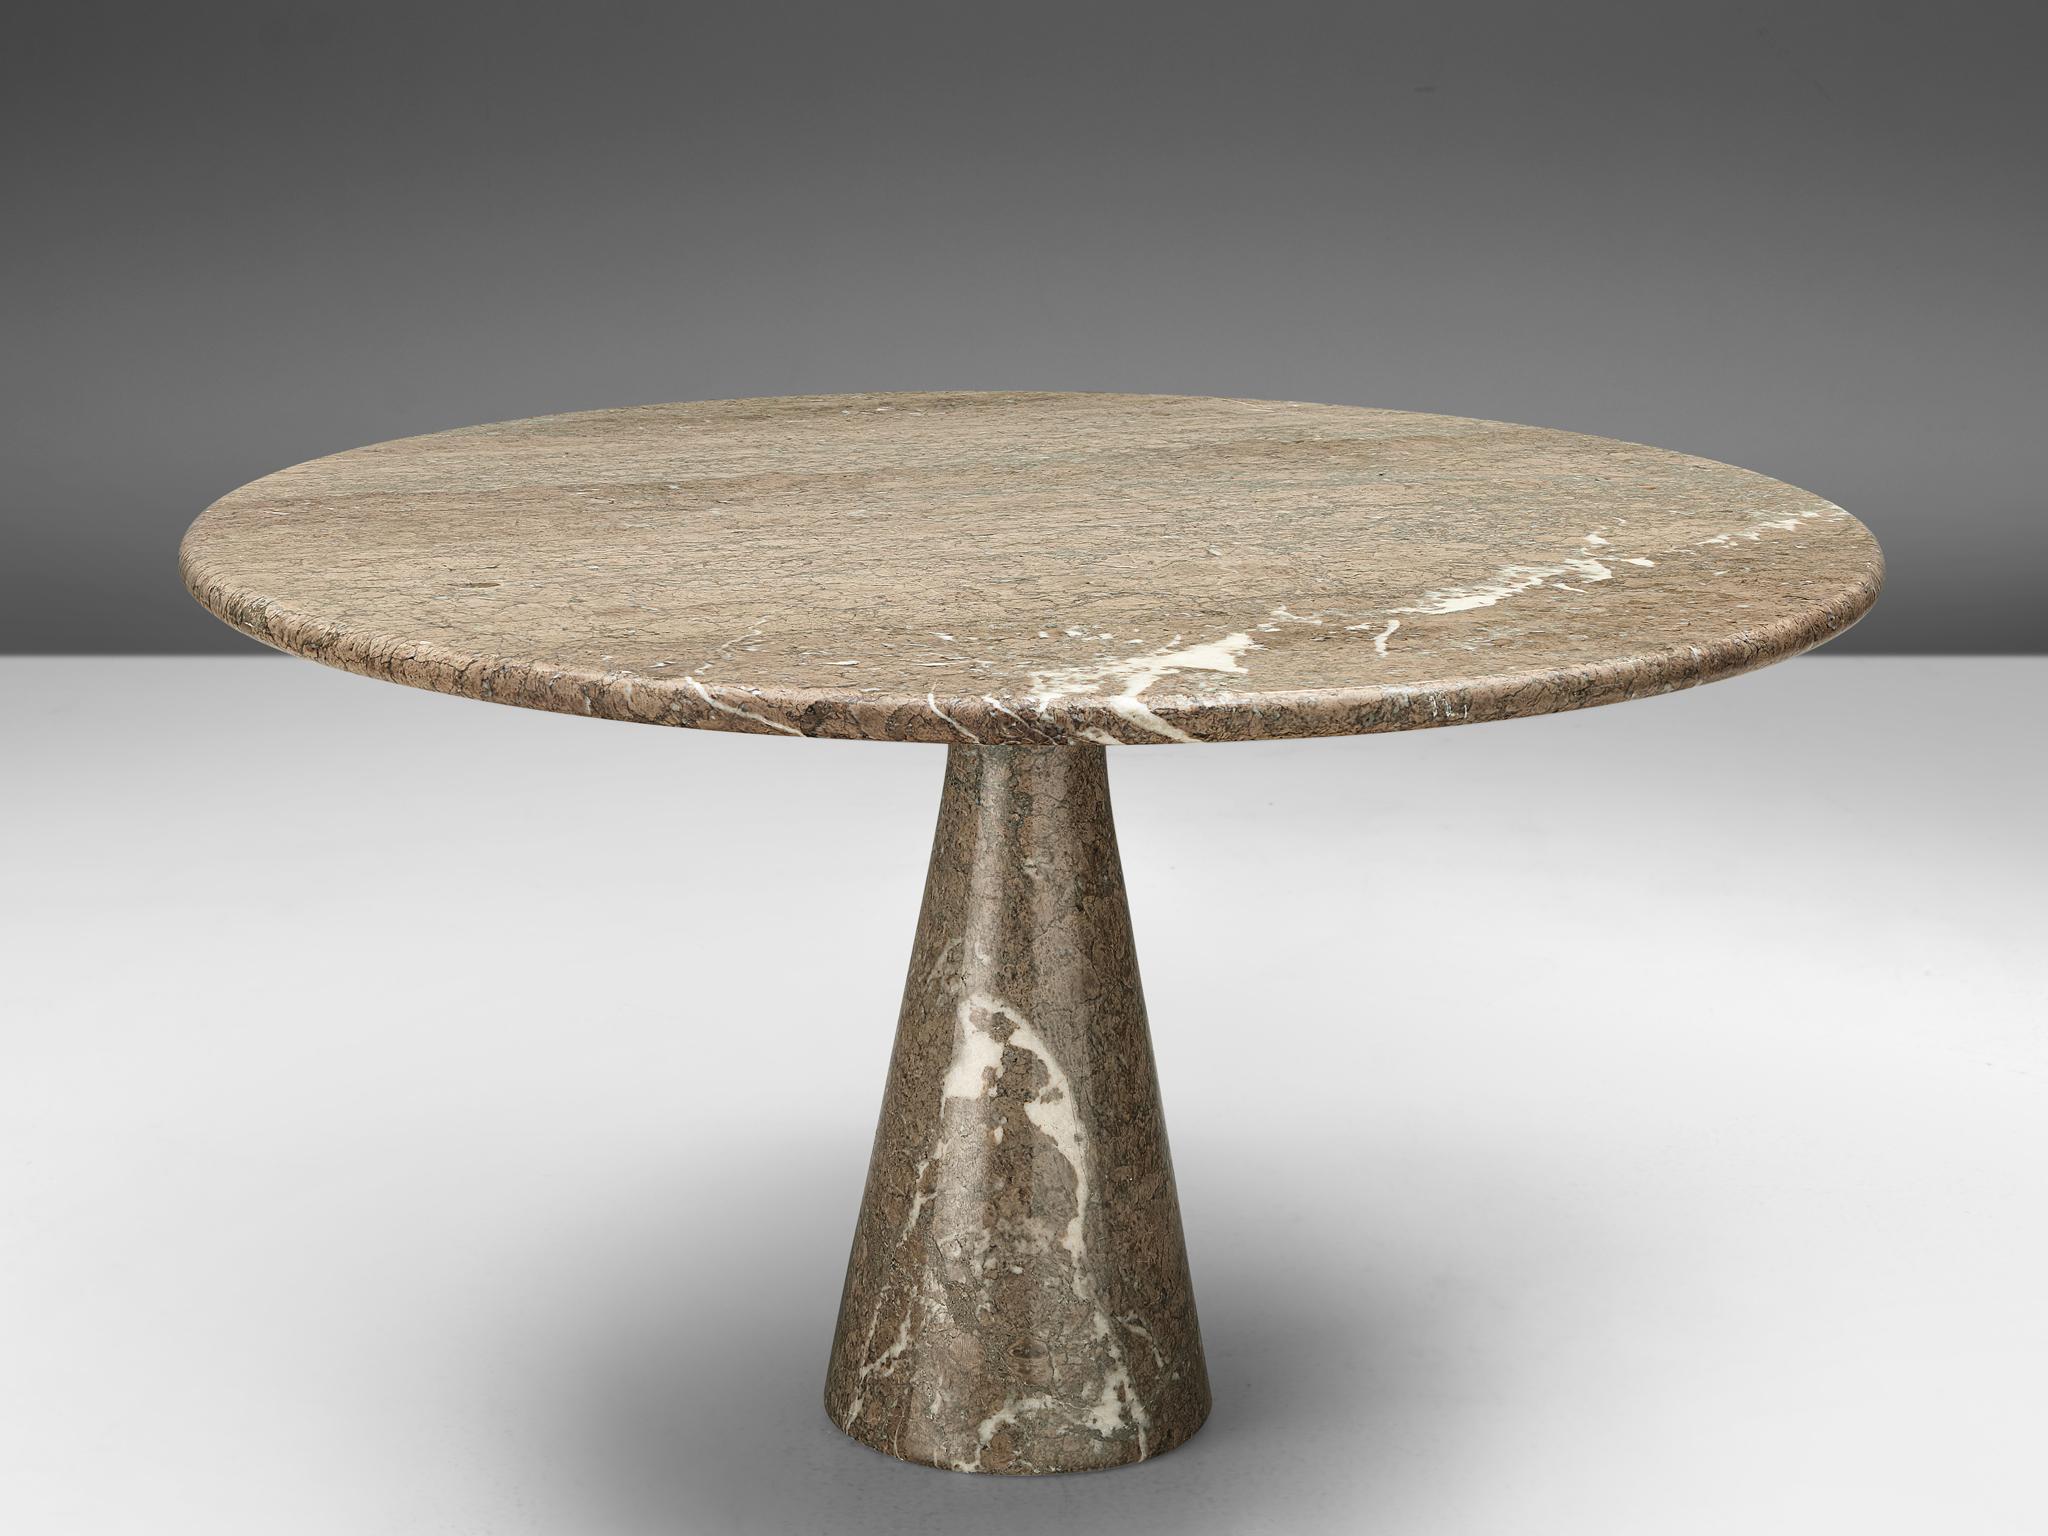 Angelo Mangiarotti, pedestal dining table, marble, Italy, 1970s

This grey marble table is designed by Italian Angelo Mangiarotti. The circular top rests perfectly on the cone. The design showcases a play of balance and rhythm. The design is